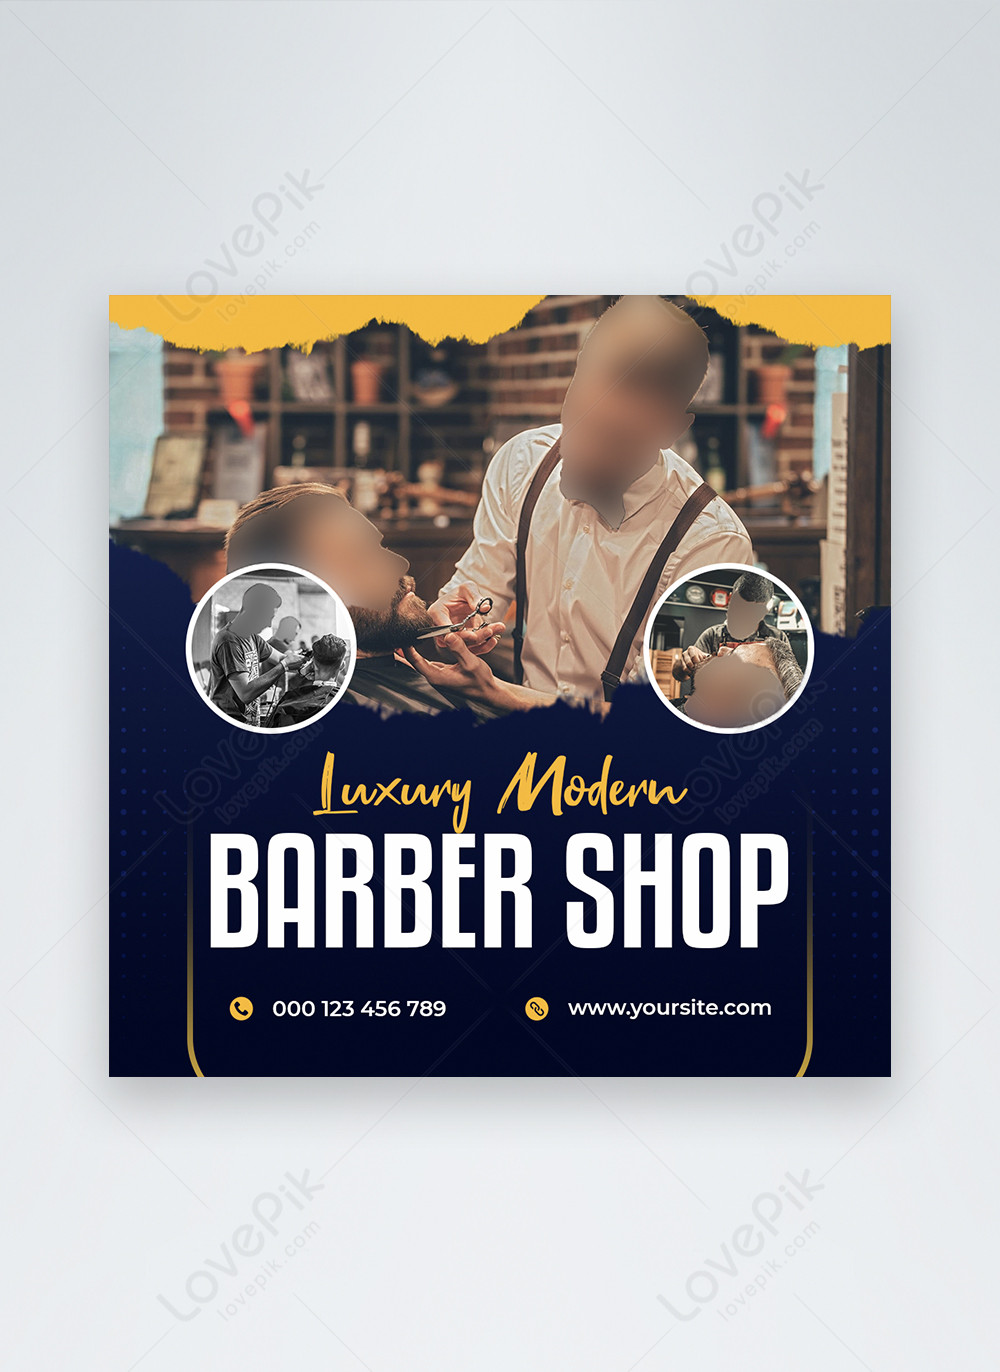 Free Barber Shop Promotion Instagram Story Template - Download in